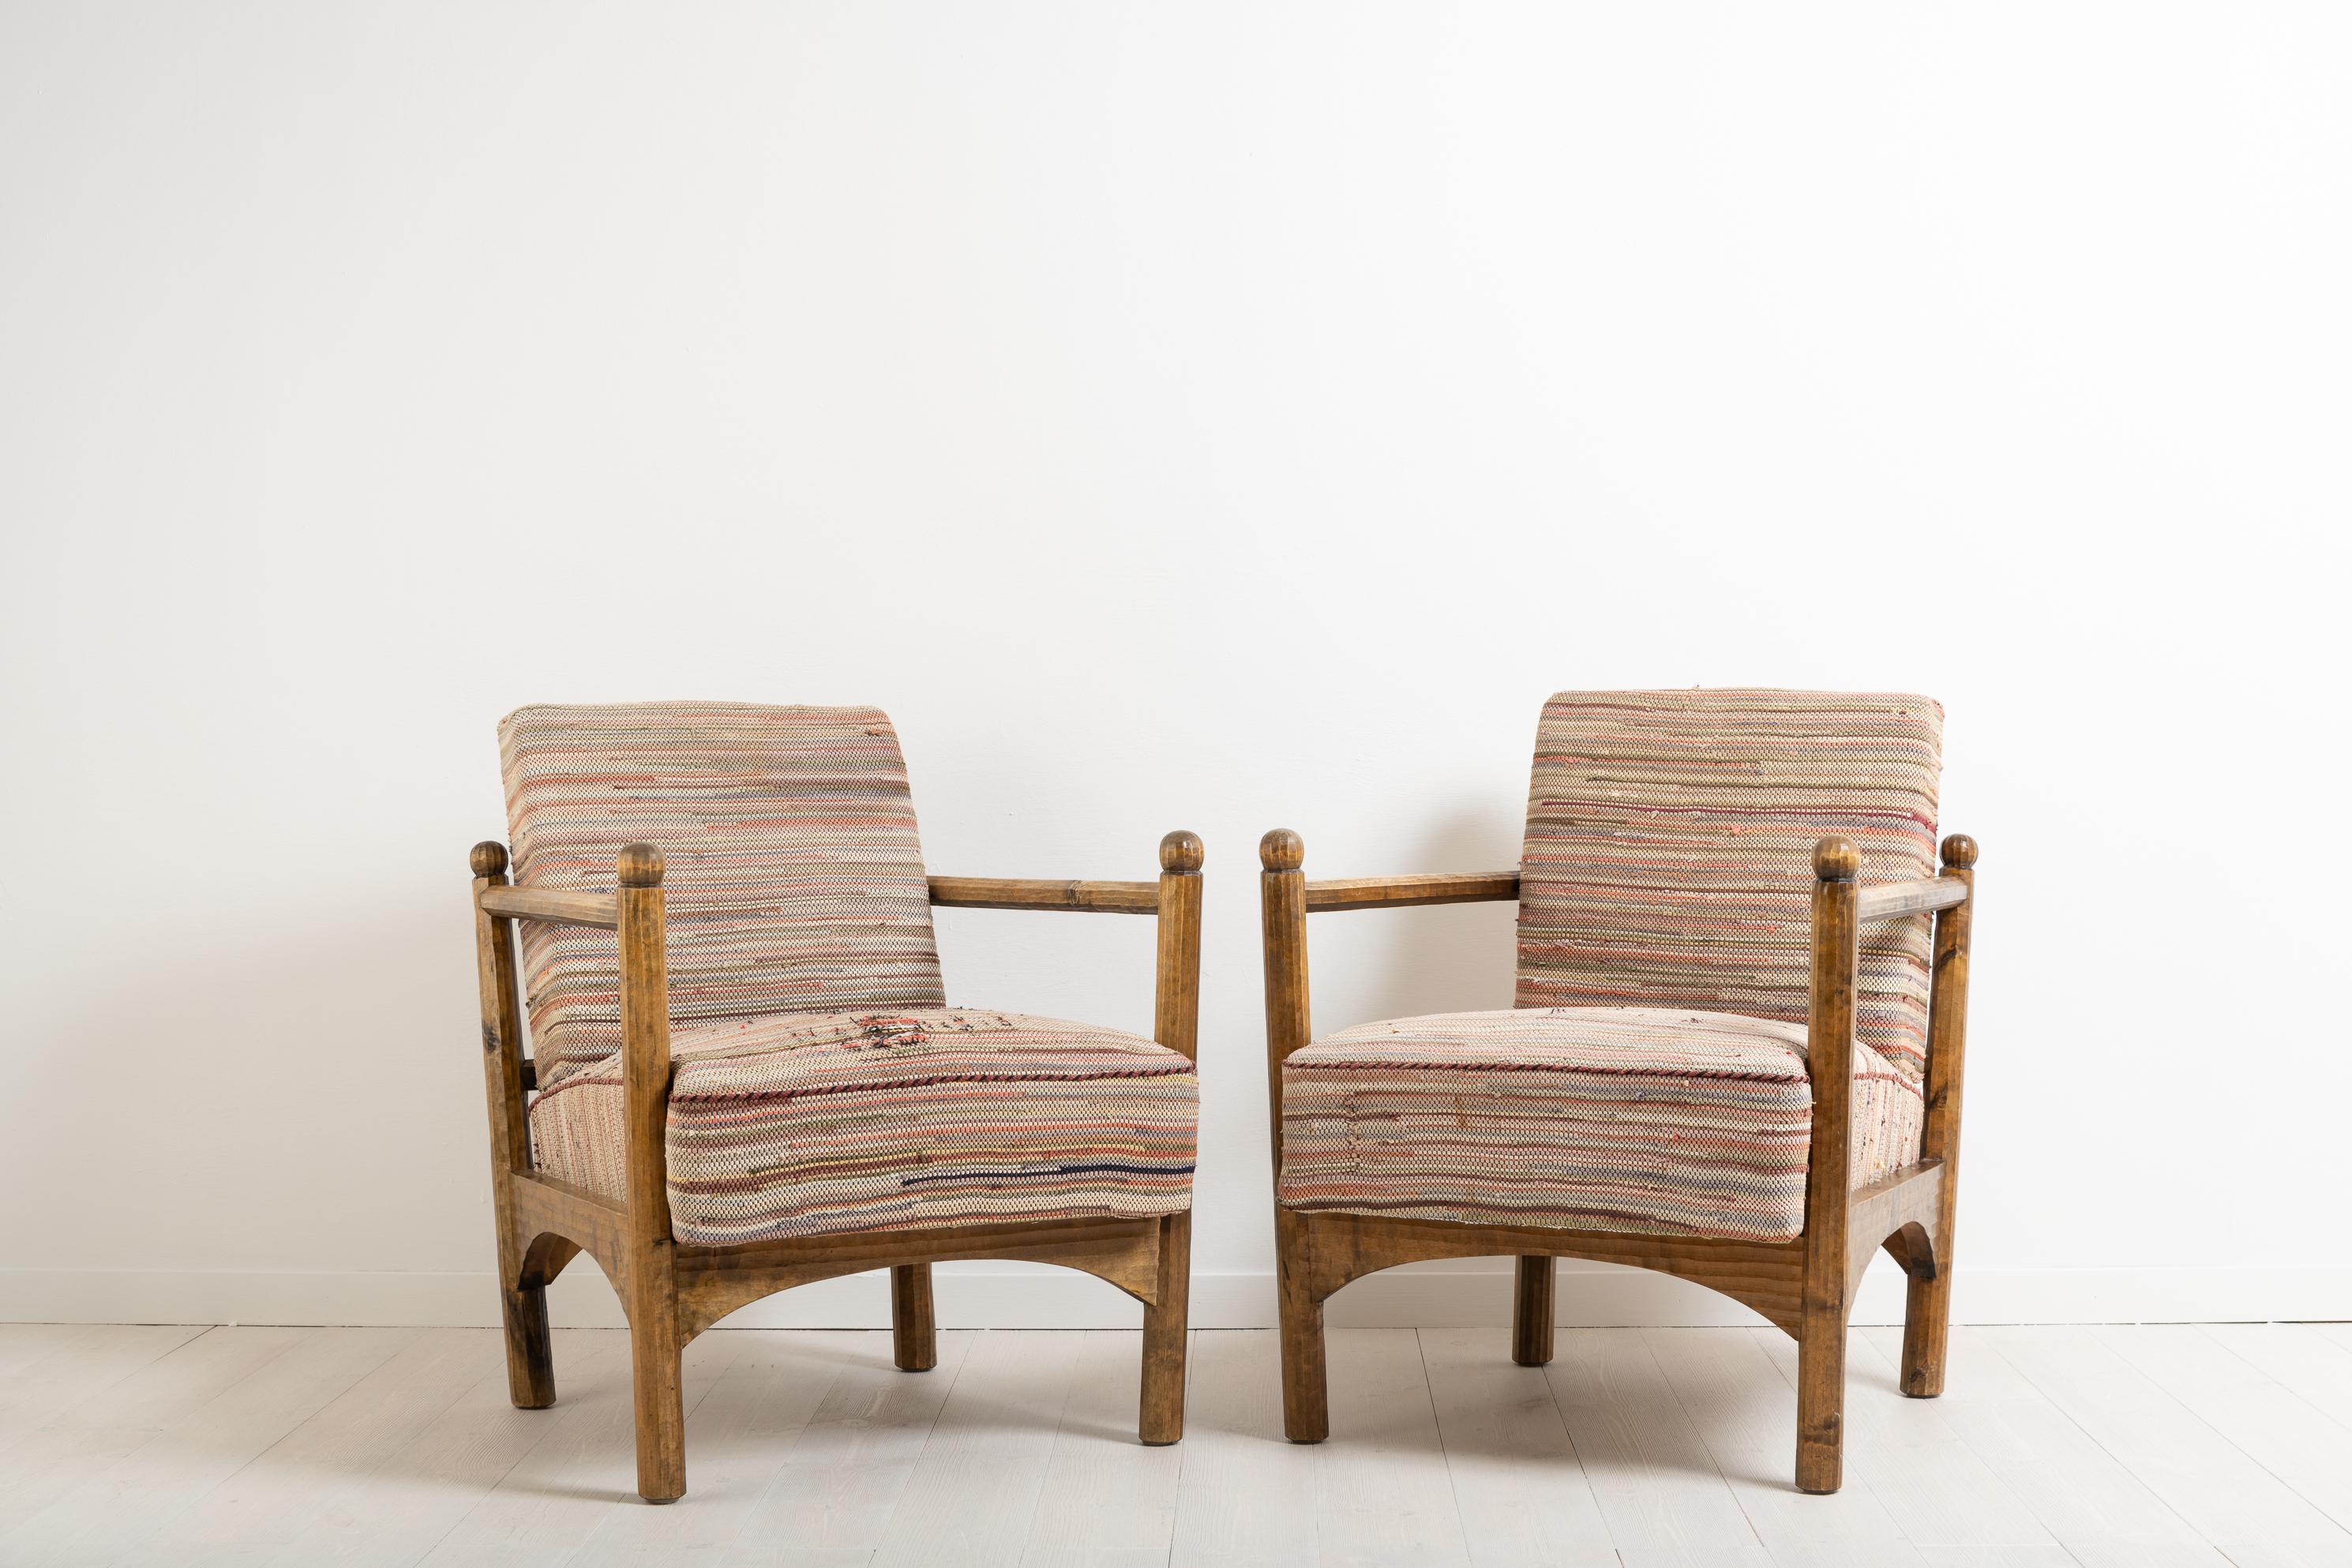 Unusual armchairs Swedish Grace from the 1920s or 1930s. The armchairs are made in a style similar to that of Swedish designer Axel Einar Hjort. Frame in stained birch and hand worked finish. Loose cushions with the original upholstery, the fabric